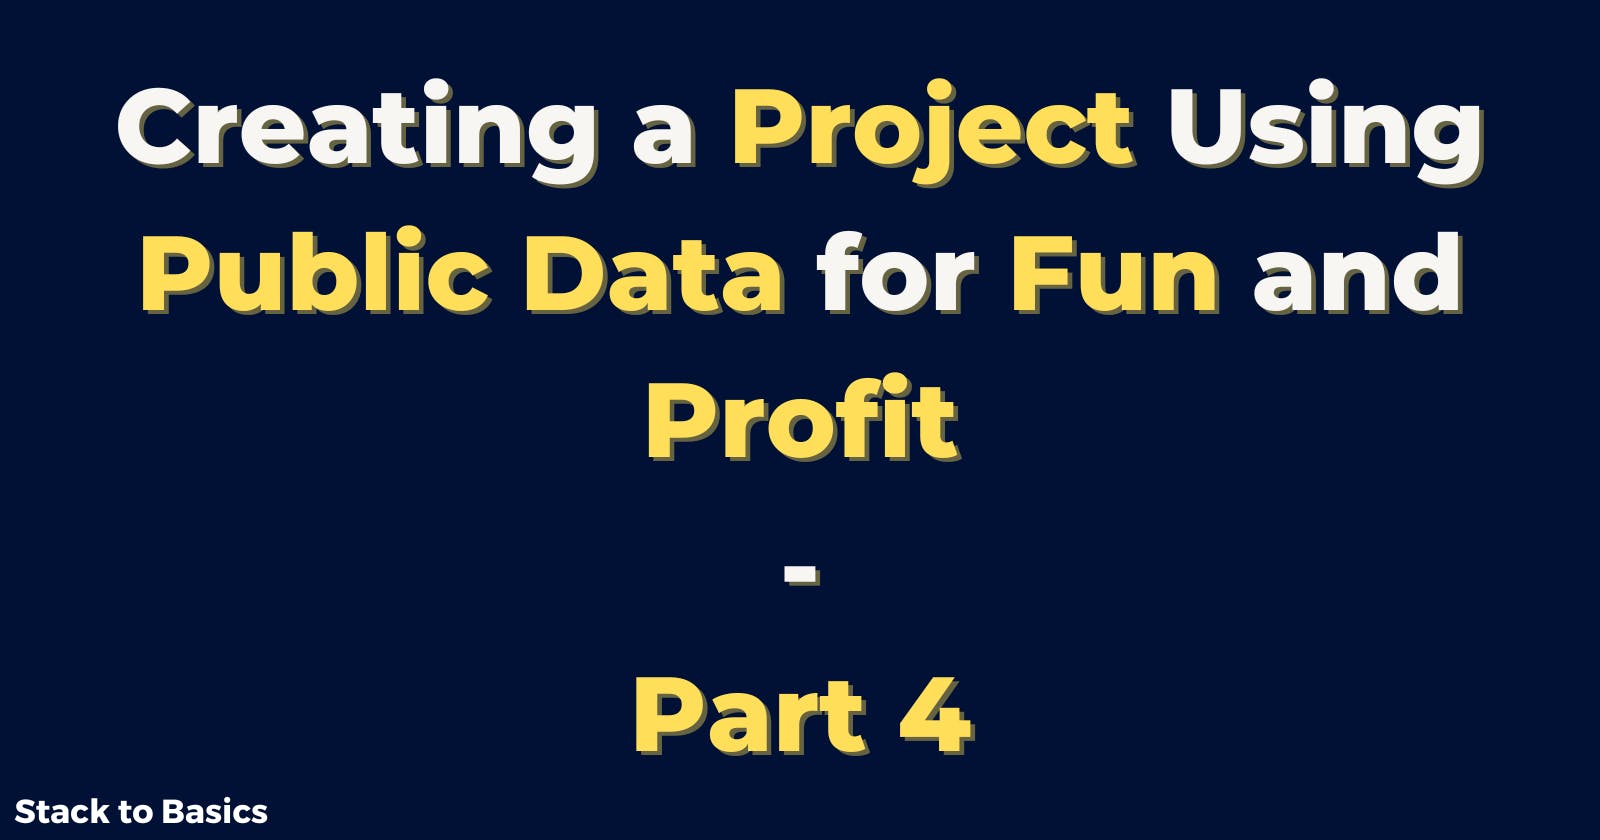 Creating a Project Using Public Data for Fun and Profit: Part 4